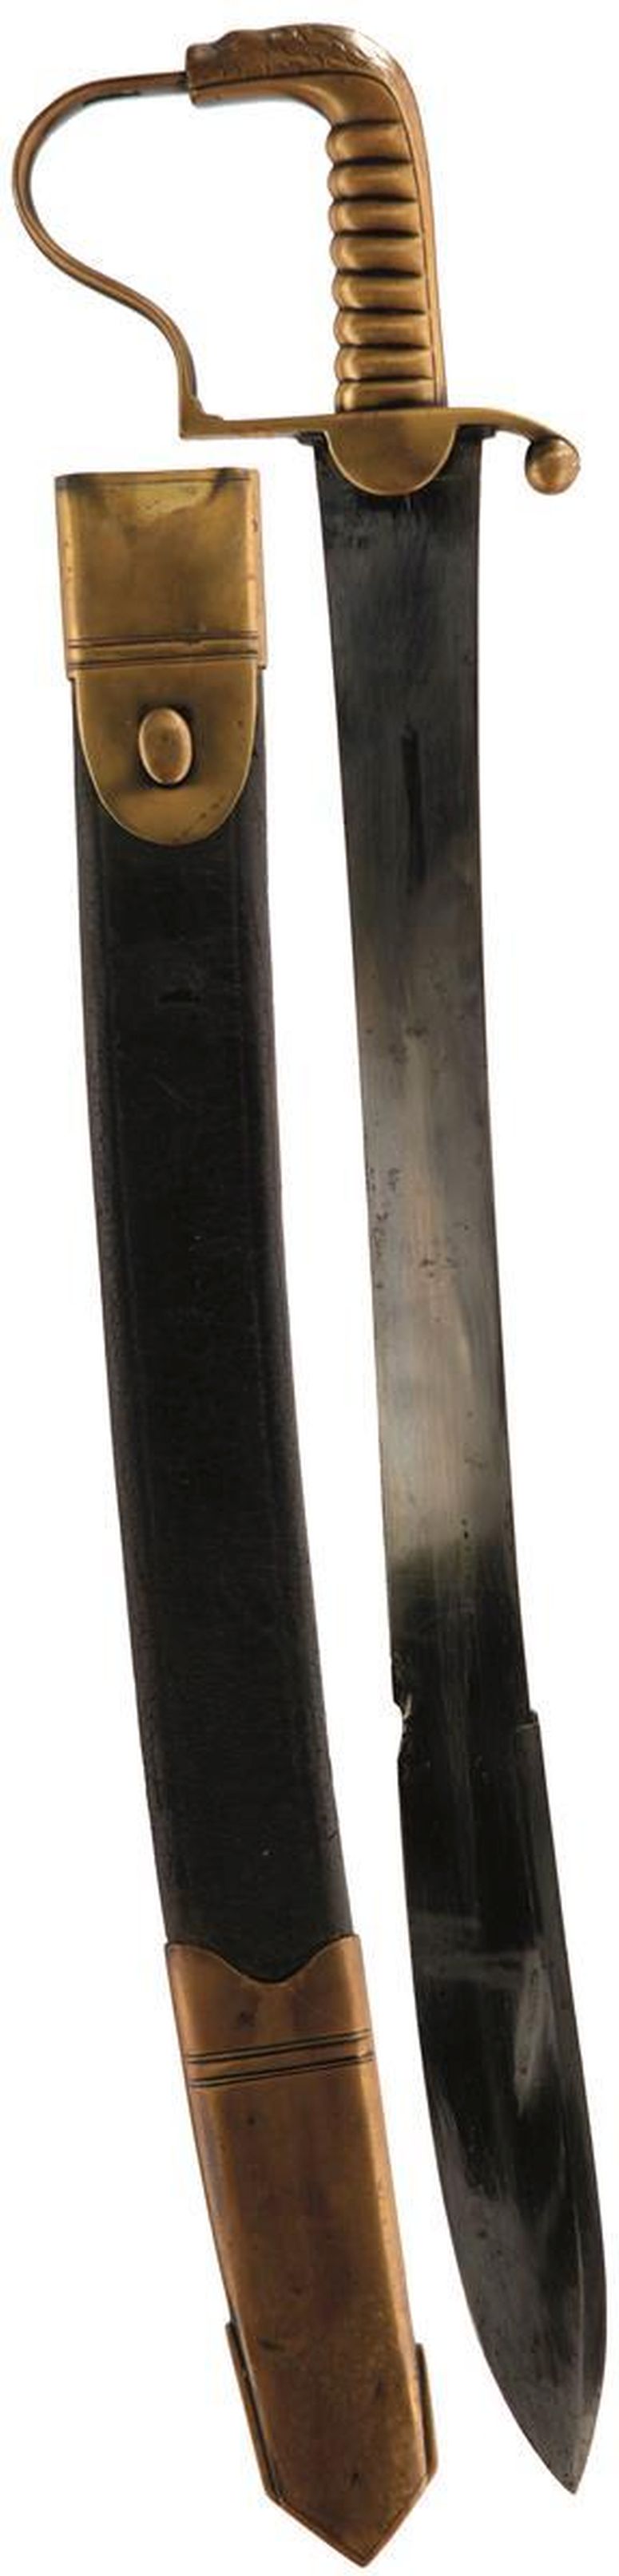 AN 1816 PATTERN RIFLEMAN'S OR PIONEER'S SHORT SWORD OR SIDEARM, 55.5cm curved blade by REEVES,